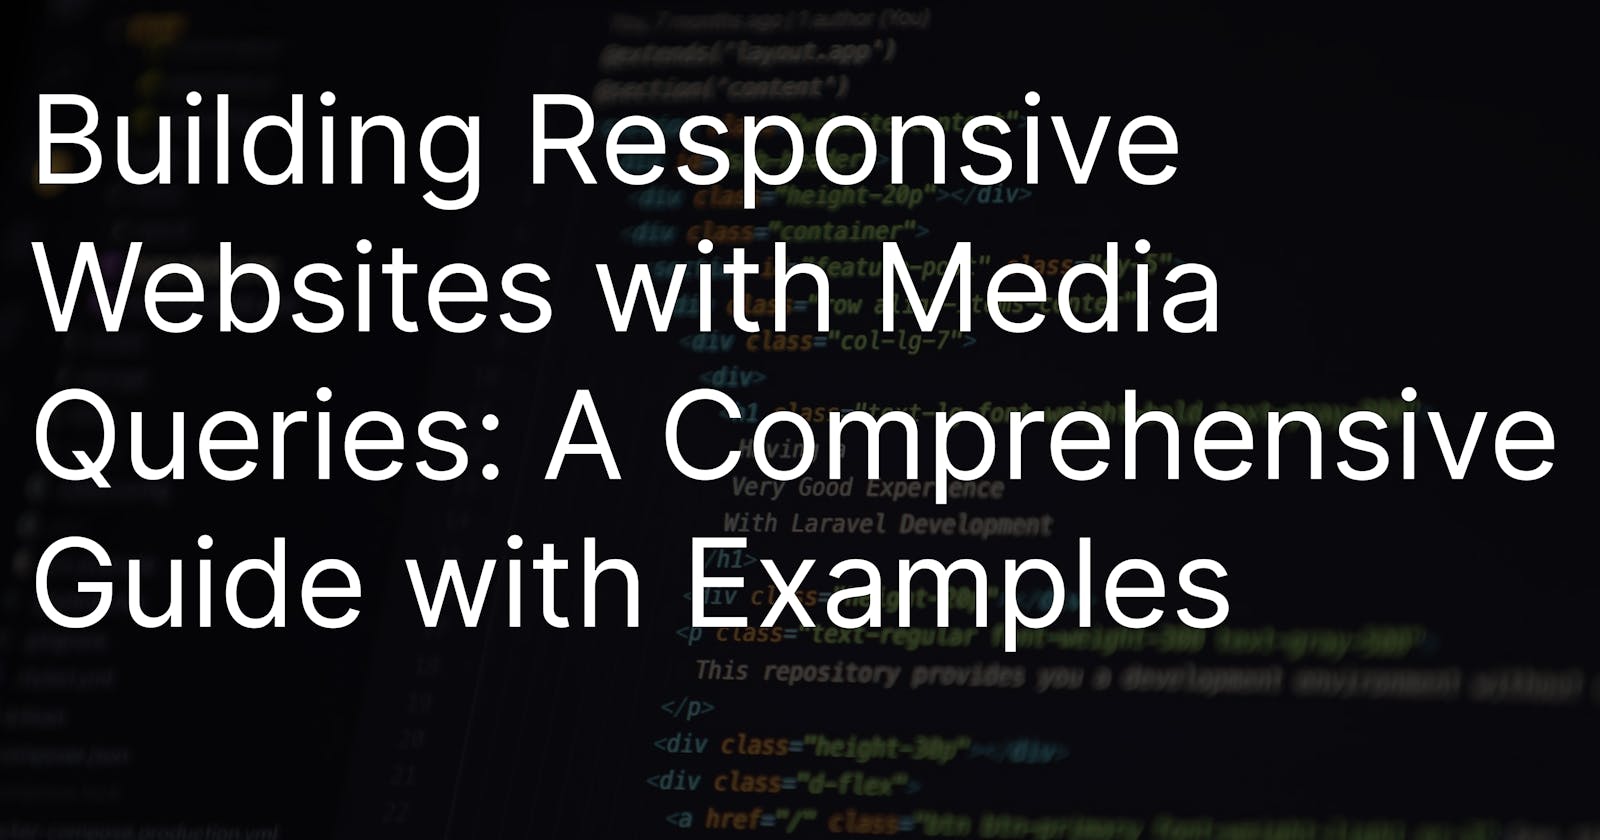 Building Responsive Websites with Media Queries: A Comprehensive Guide with Examples